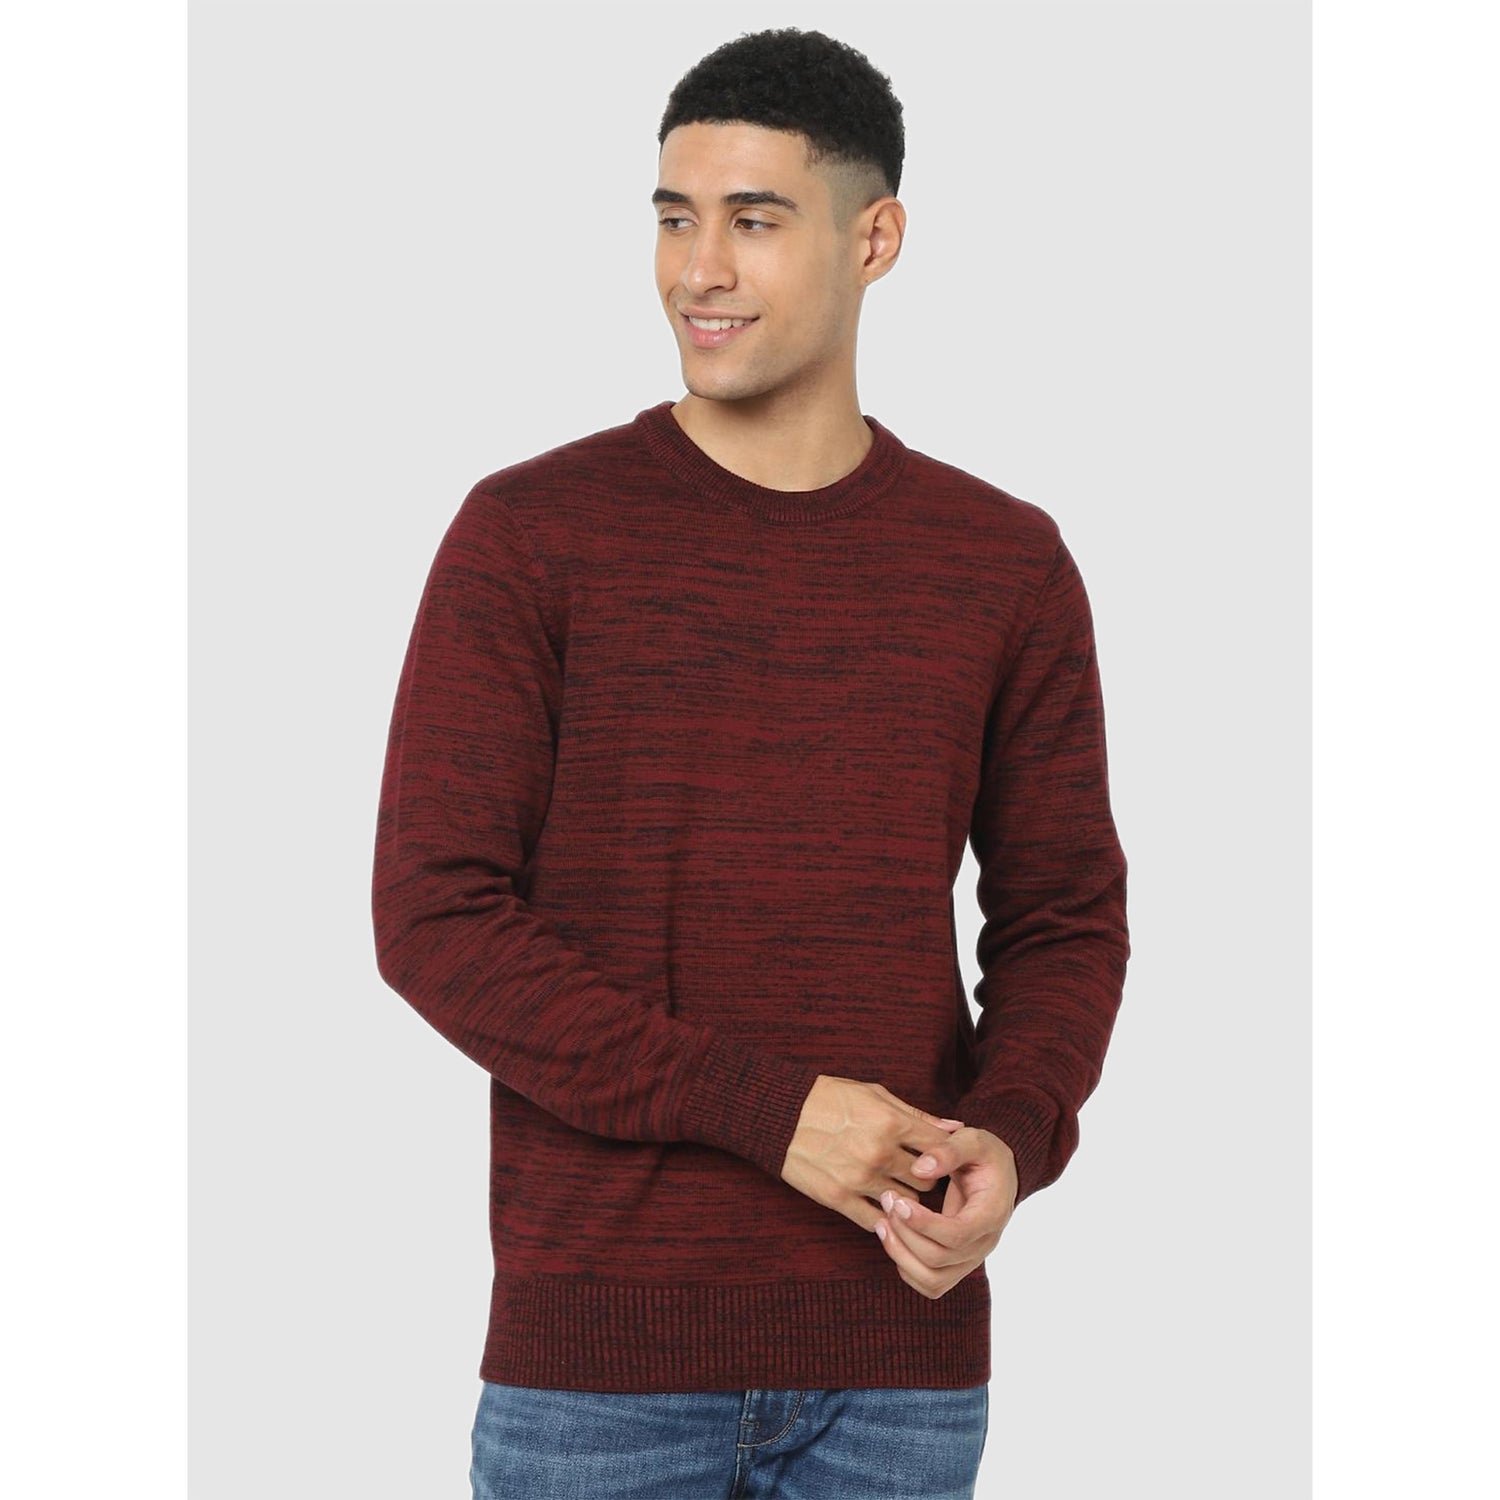 Maroon Abstract Regular Fit Sweater (Various Sizes)